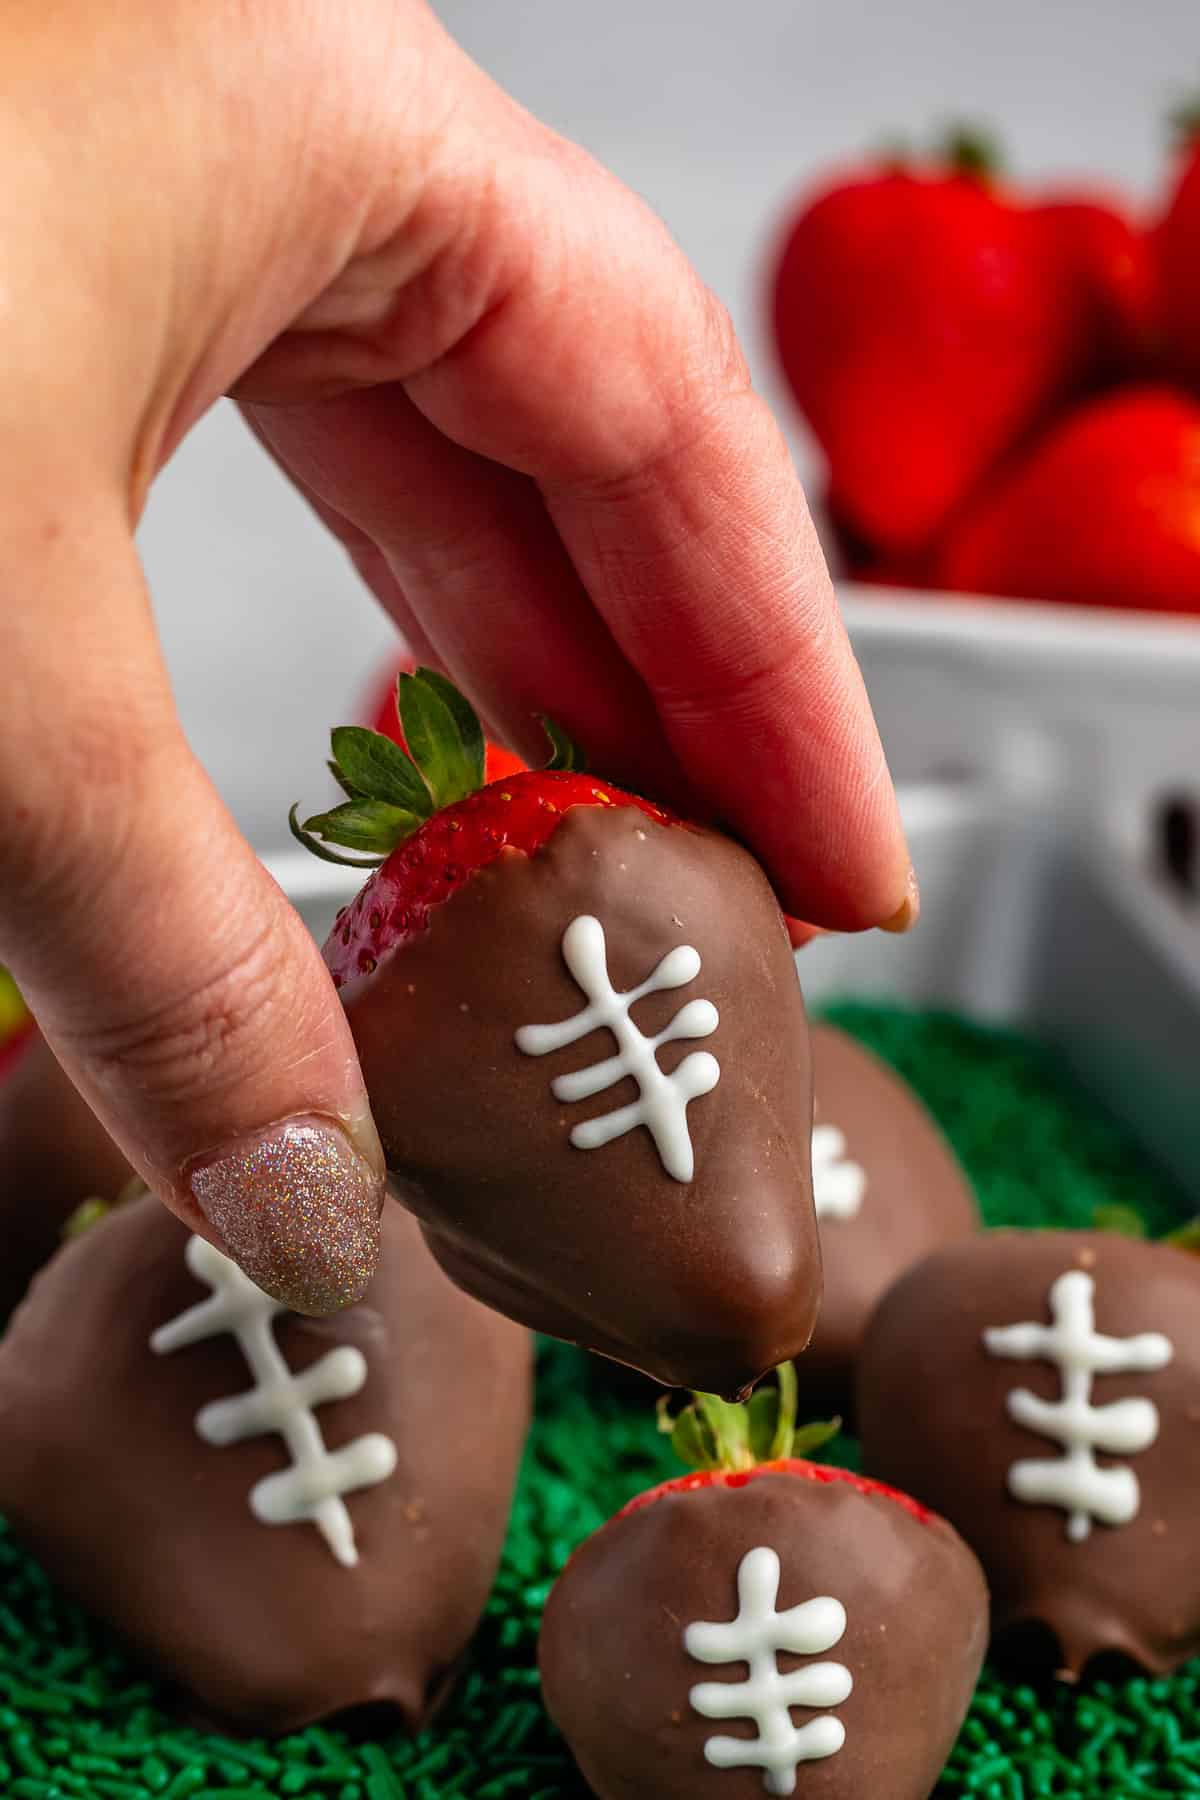 hand holding chocolate covered strawberries with white laces drawn on top with green sprinkles underneath.